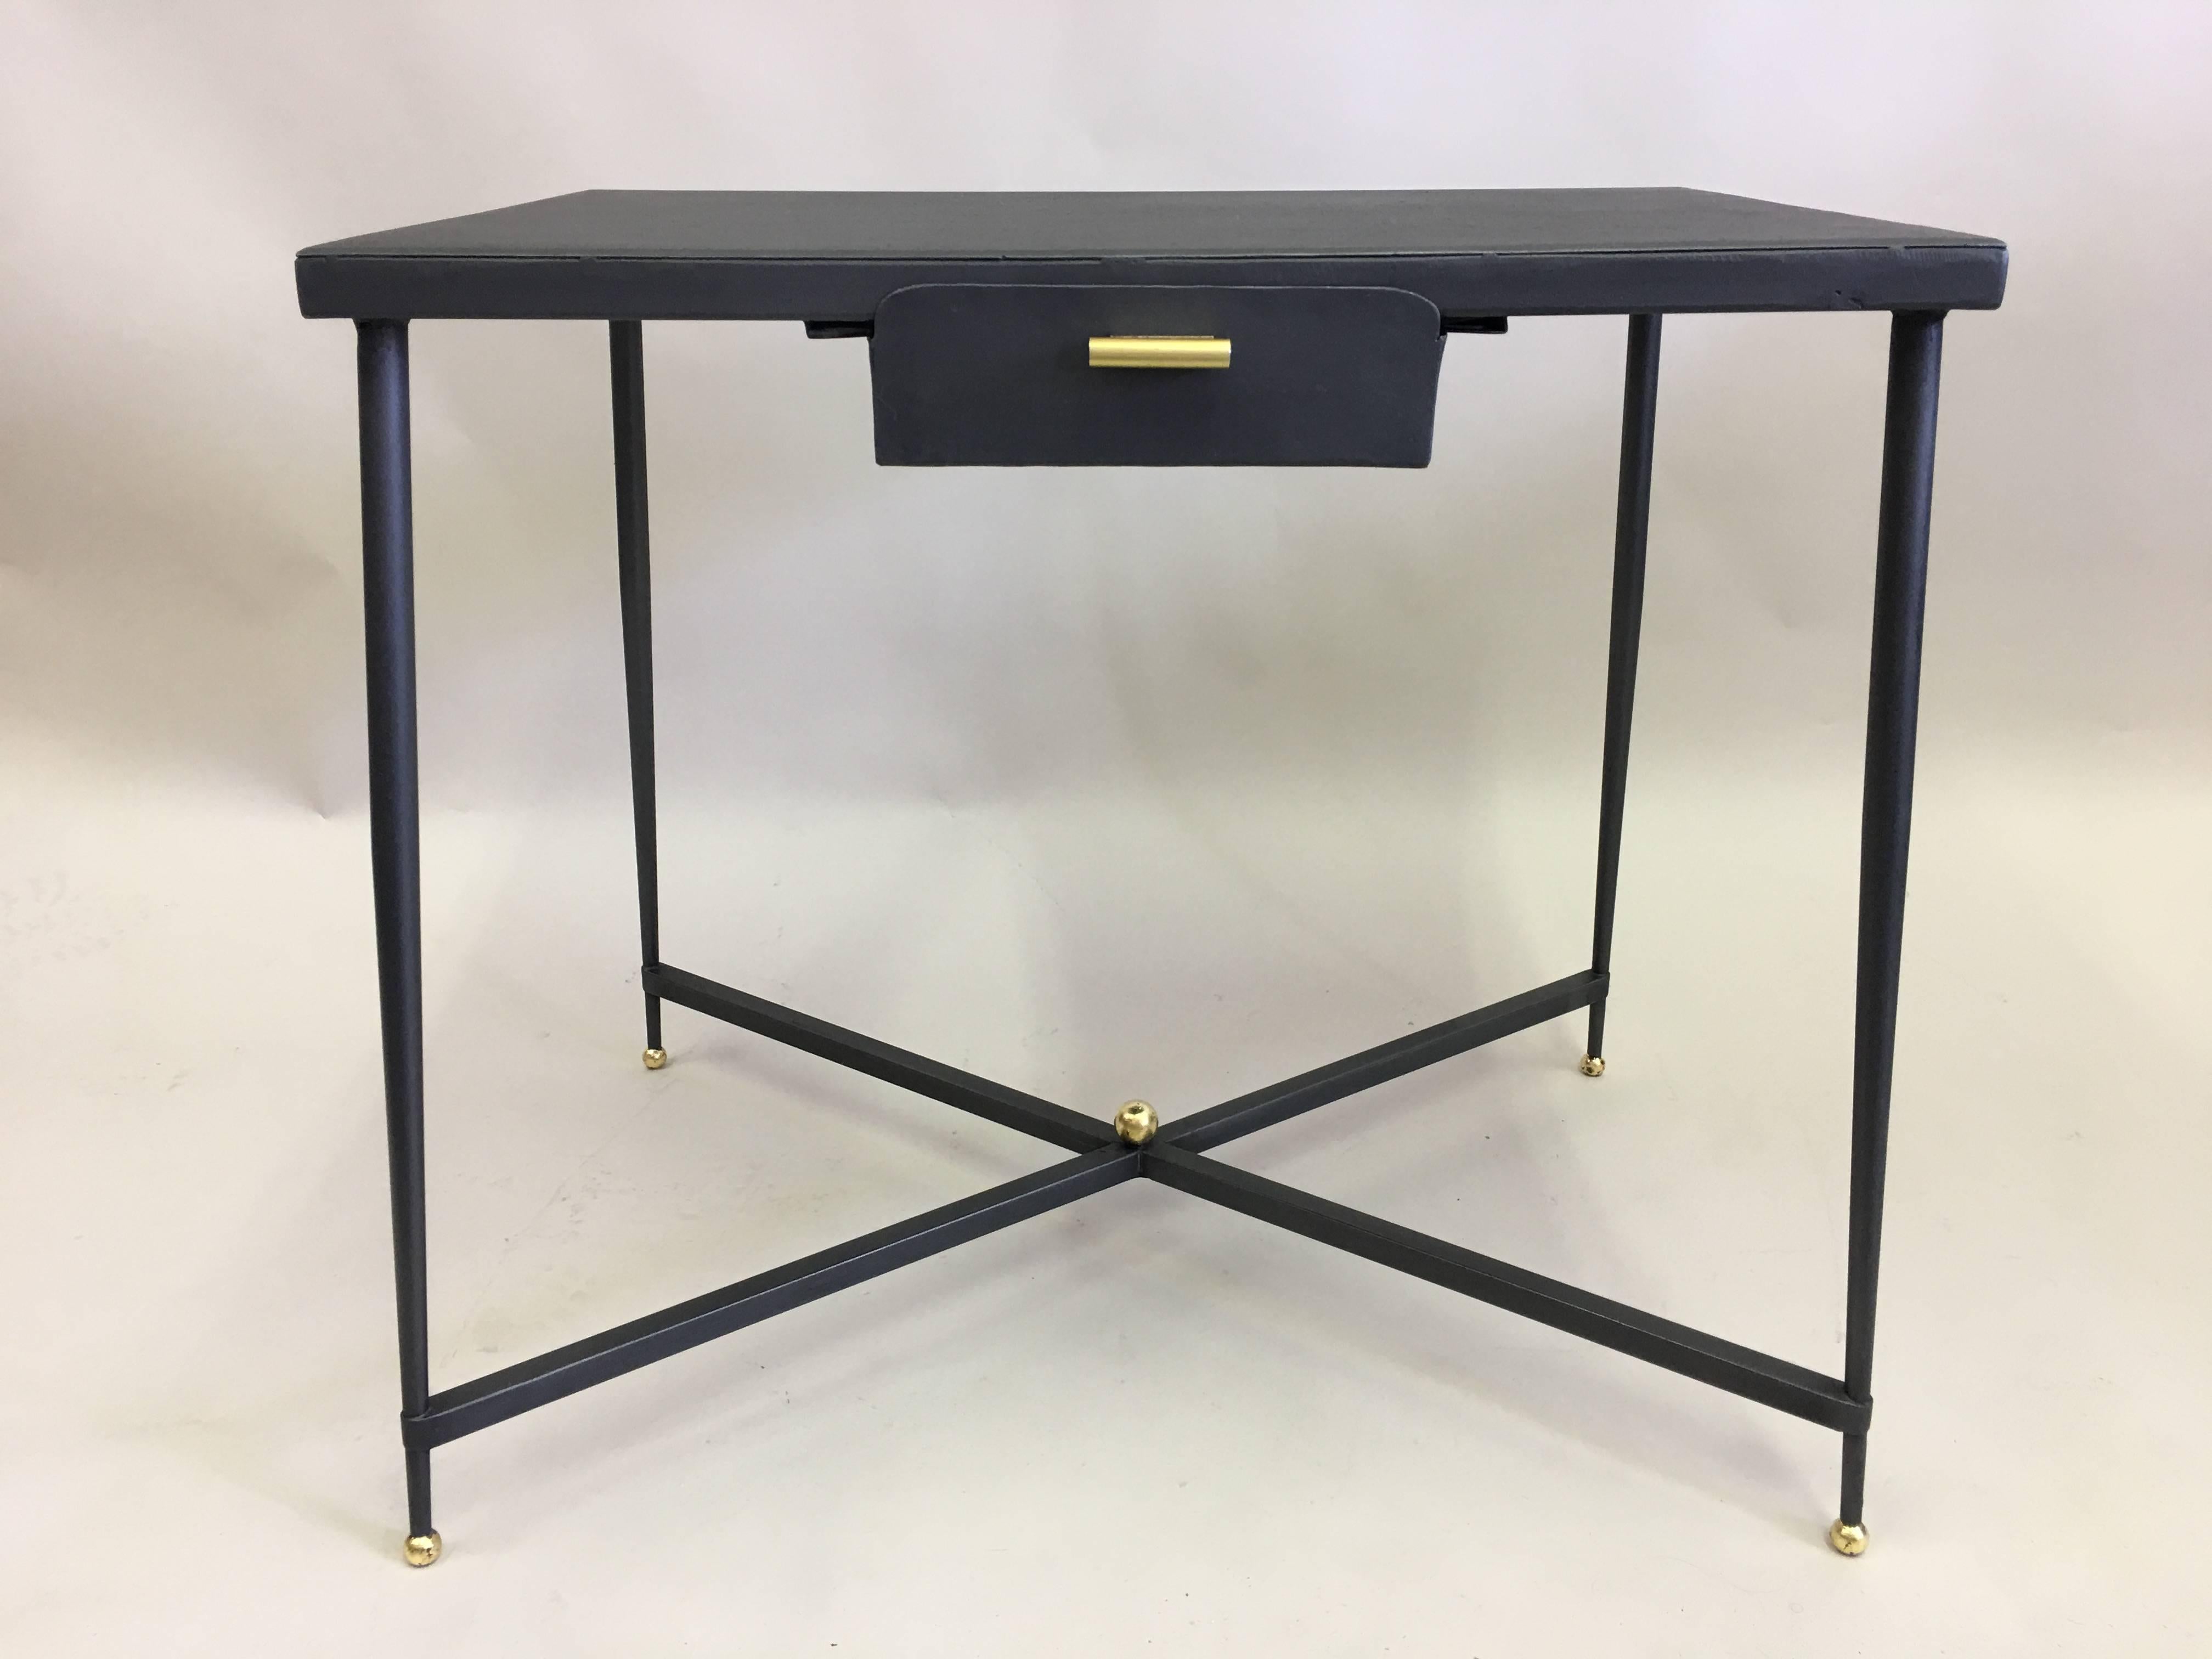 Rare and important French mid-century 1940's desk or writing table by Jacques Adnet symbolizing the iconic Modern Neoclassical nature of French 1940's design. This elegant, sober table is in partially gilt hand wrought iron including a wrought iron